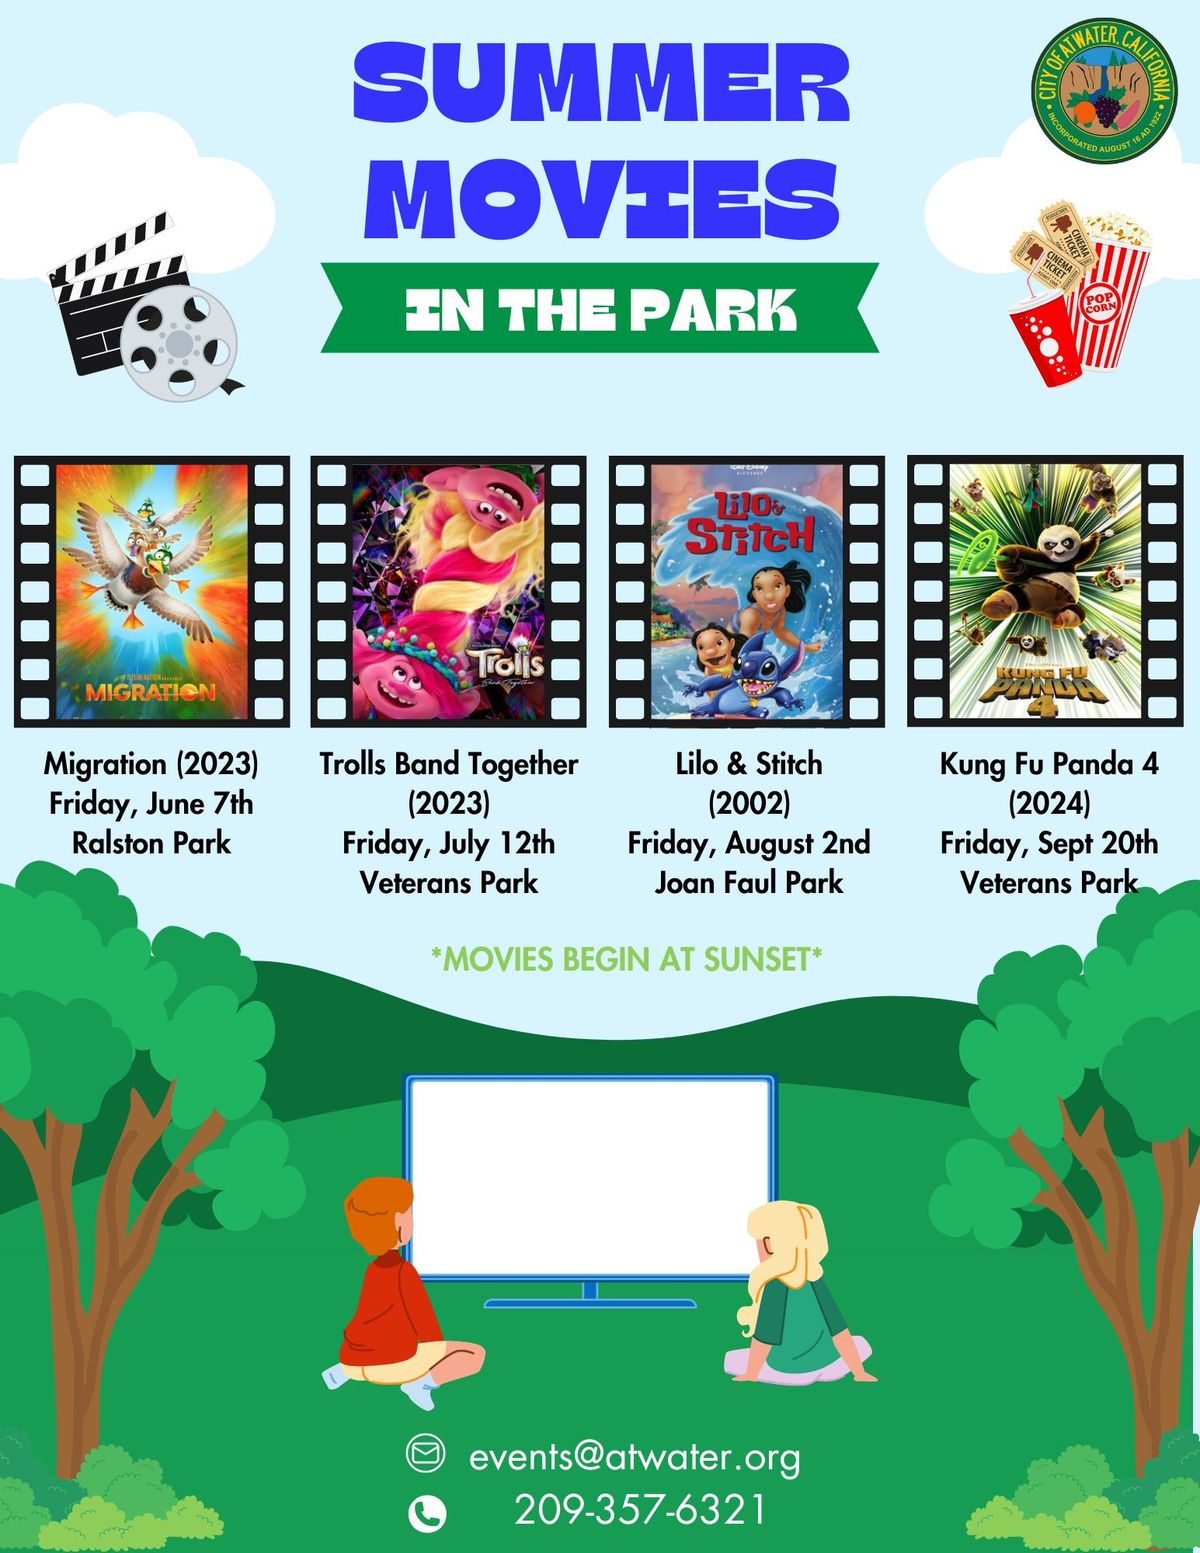 Movie in the Park (Trolls Band Together)